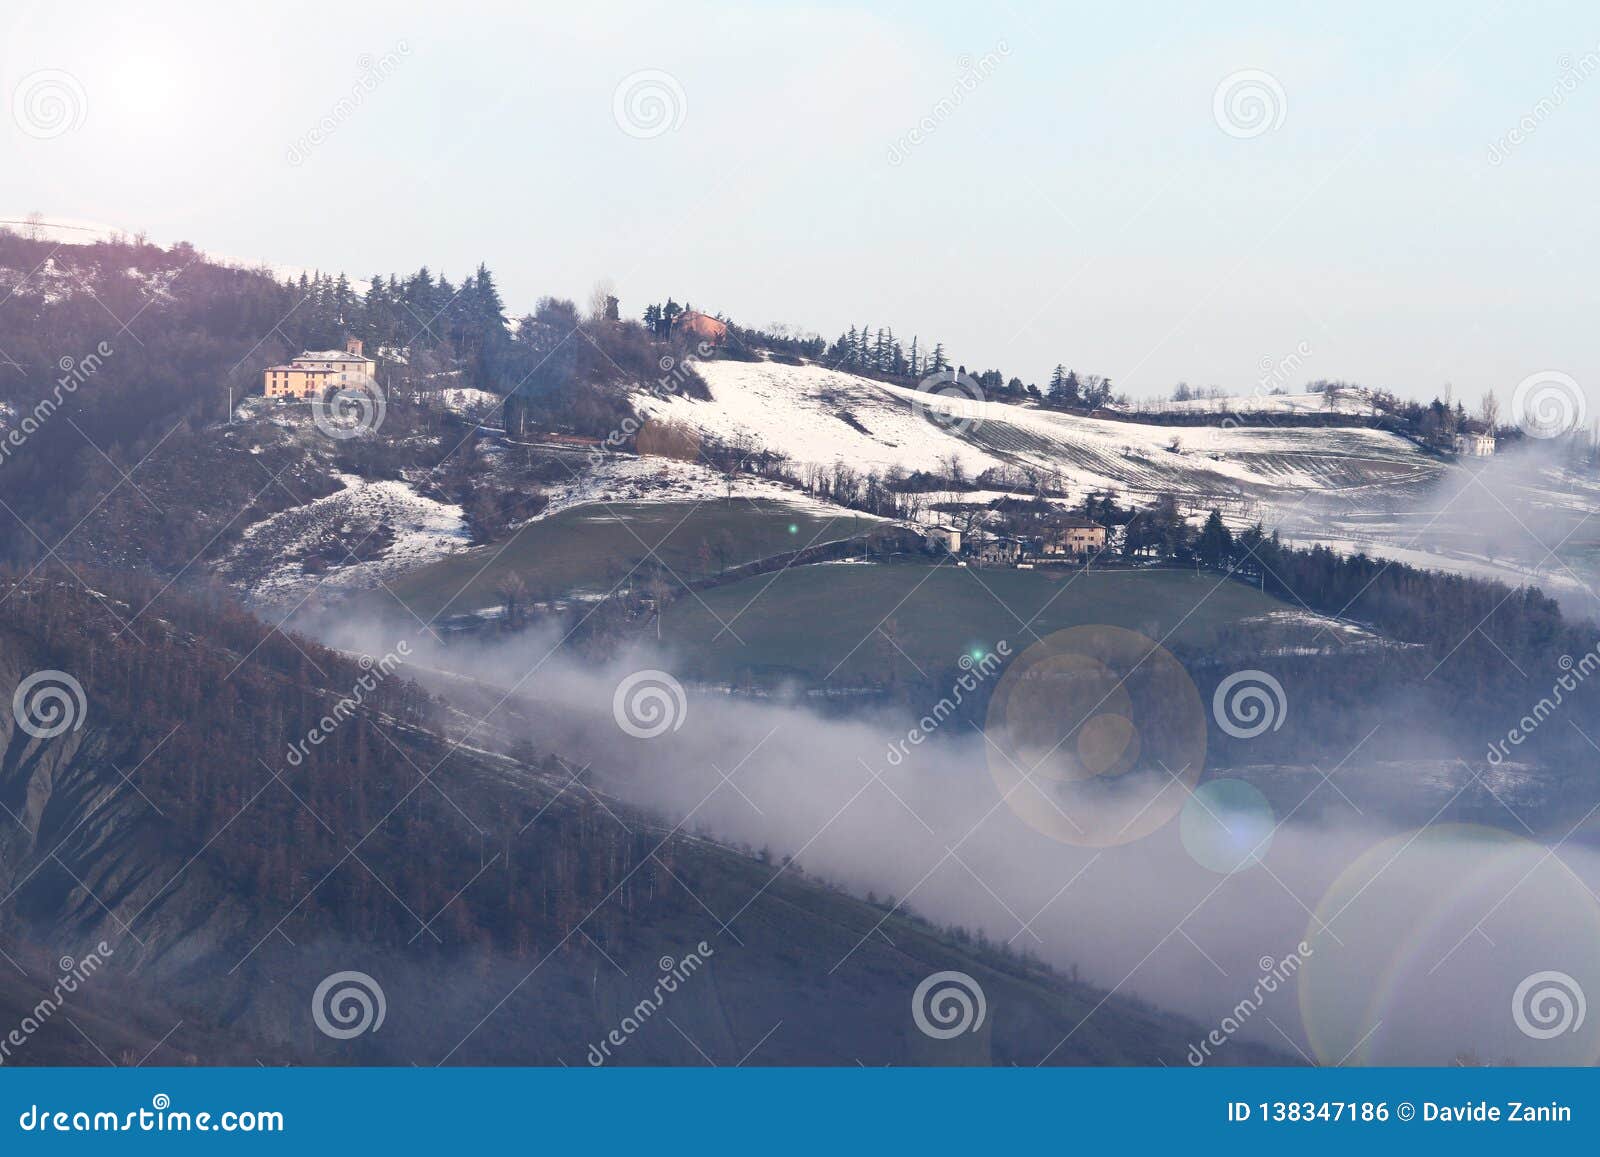 winter landscape with snow and fog in the tosco emiliano apennines, bologna, italy